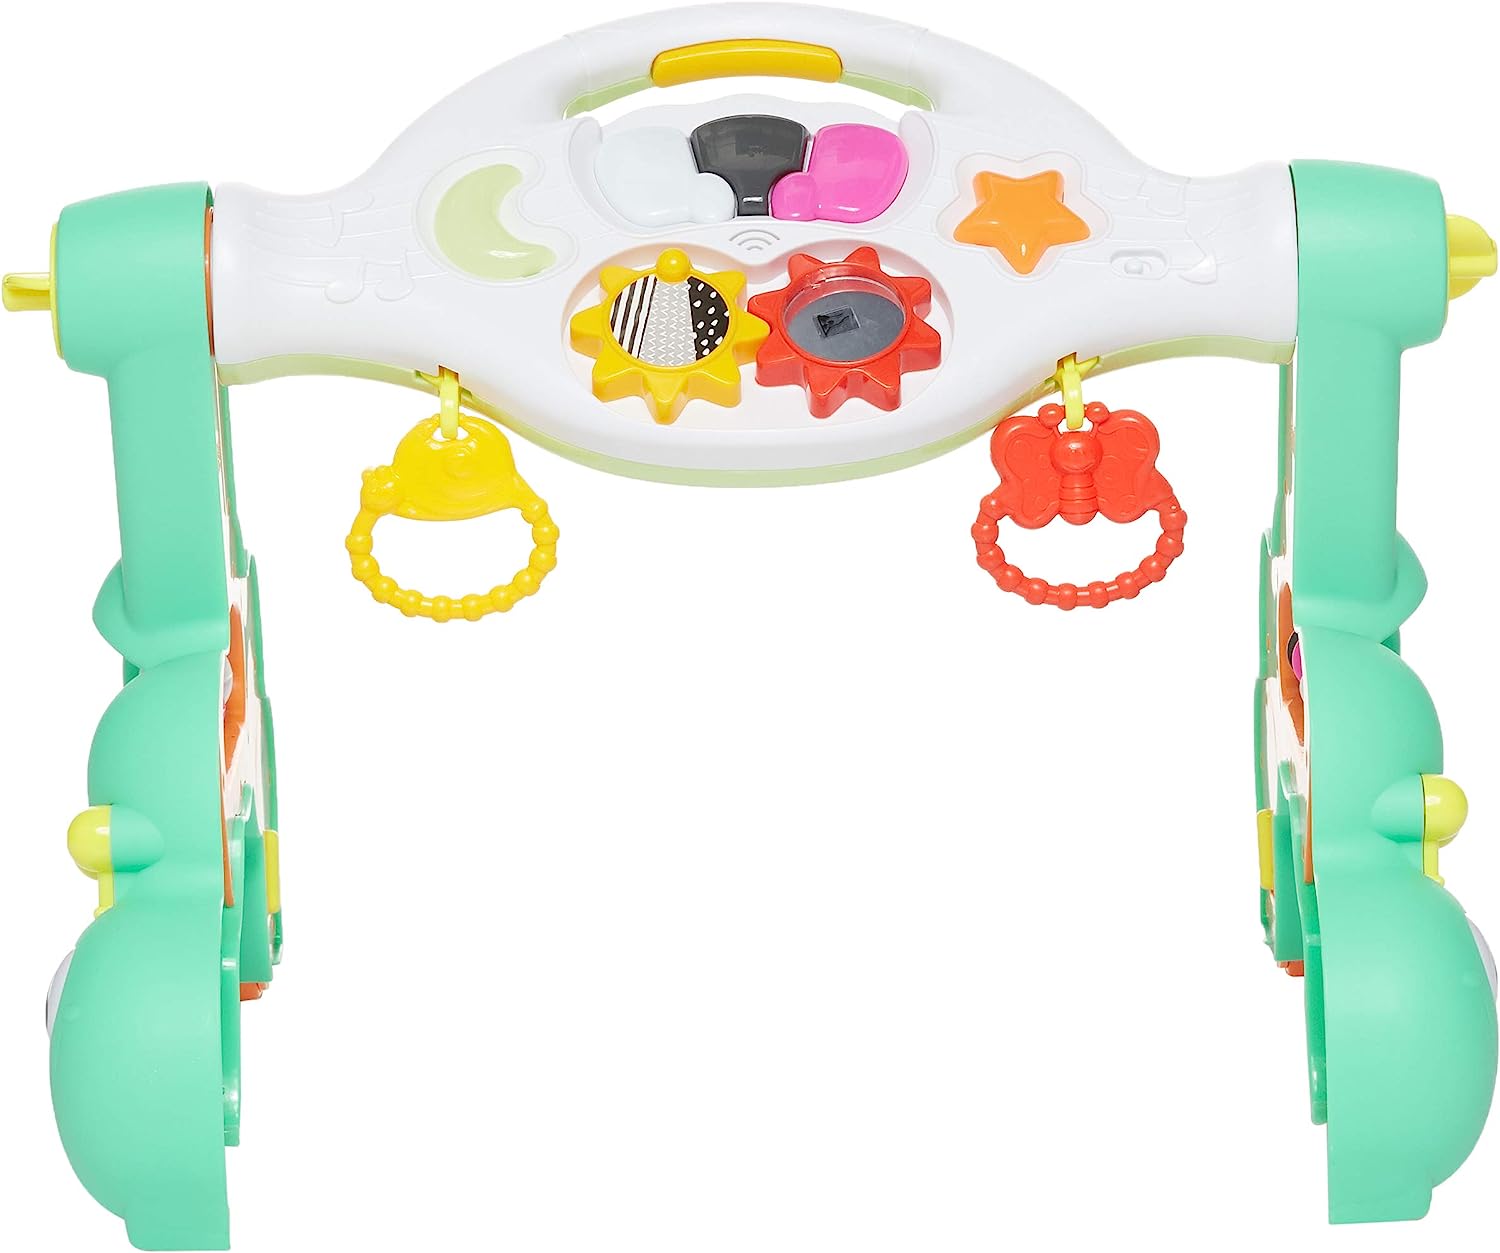 Infantino Grow with Me 3 In 1 Fun Gym.